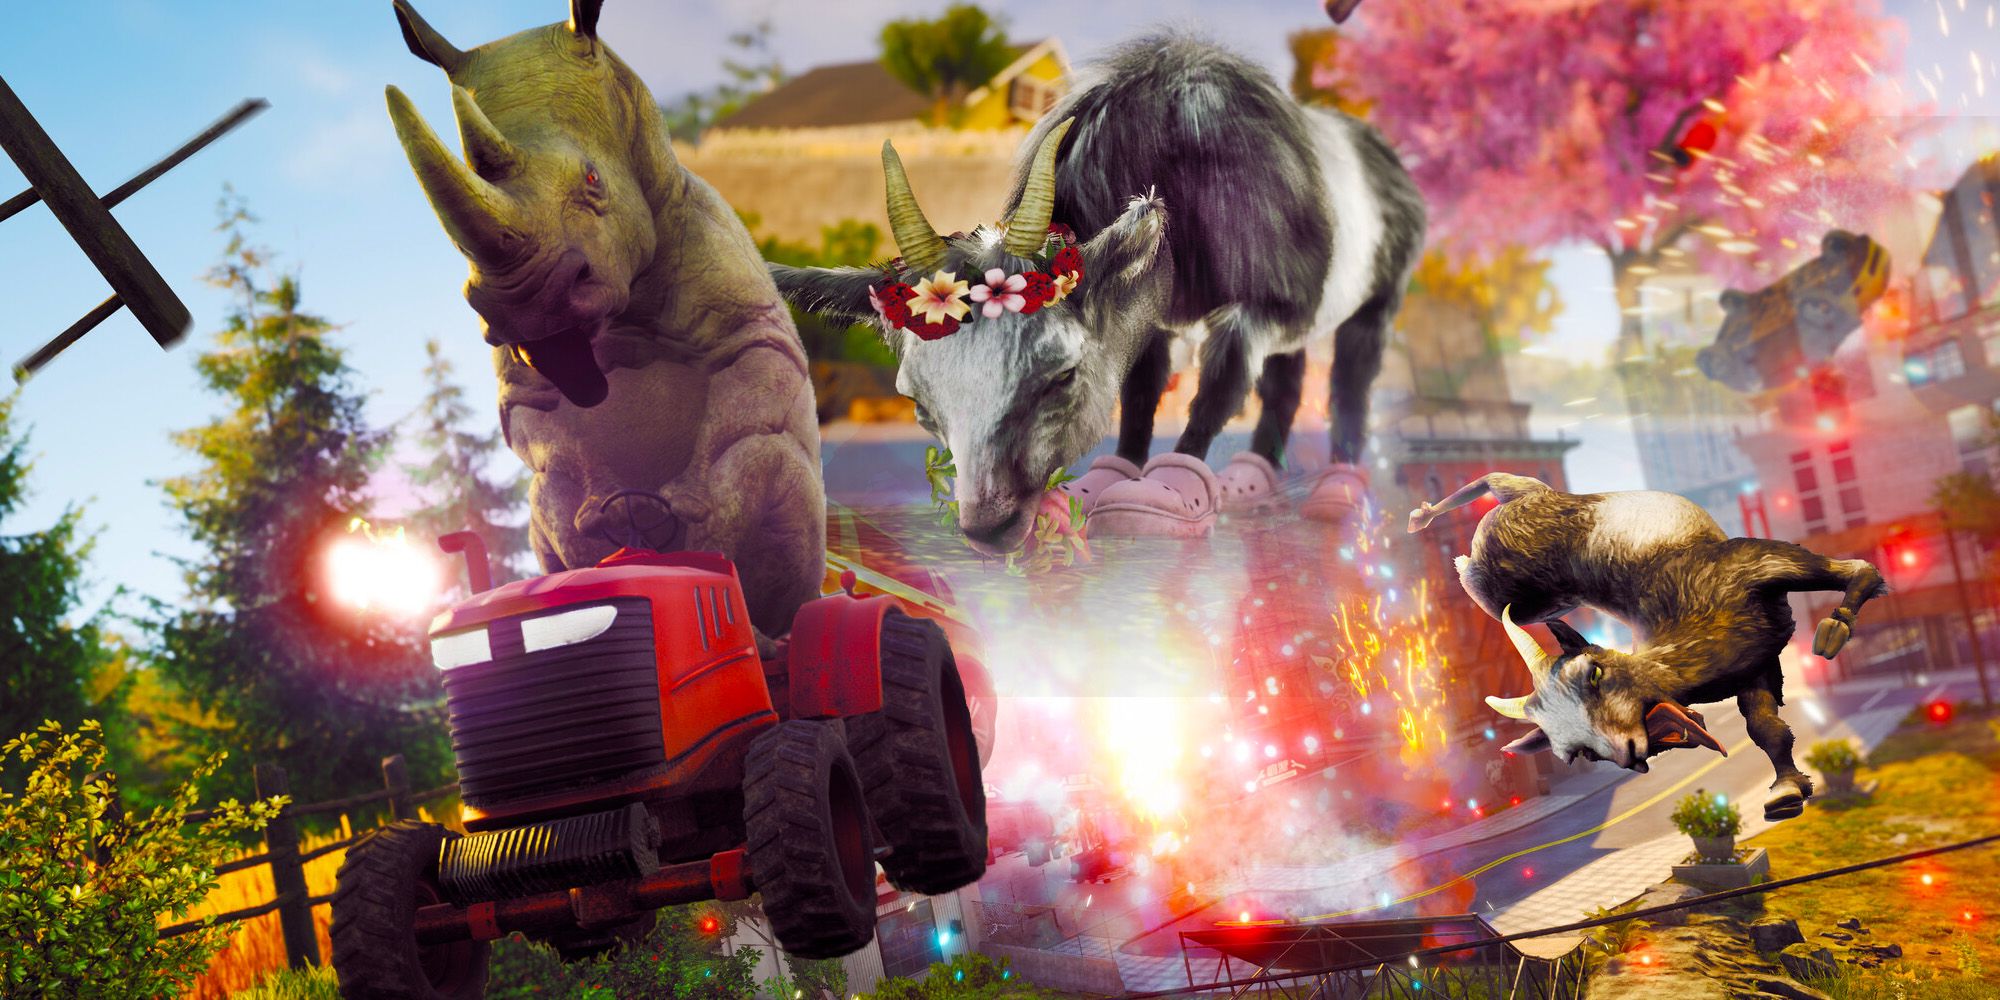 Rhino on a tractor, Goat drinking from a puddle, Goat doing a kick, all from Goat Simulator 3